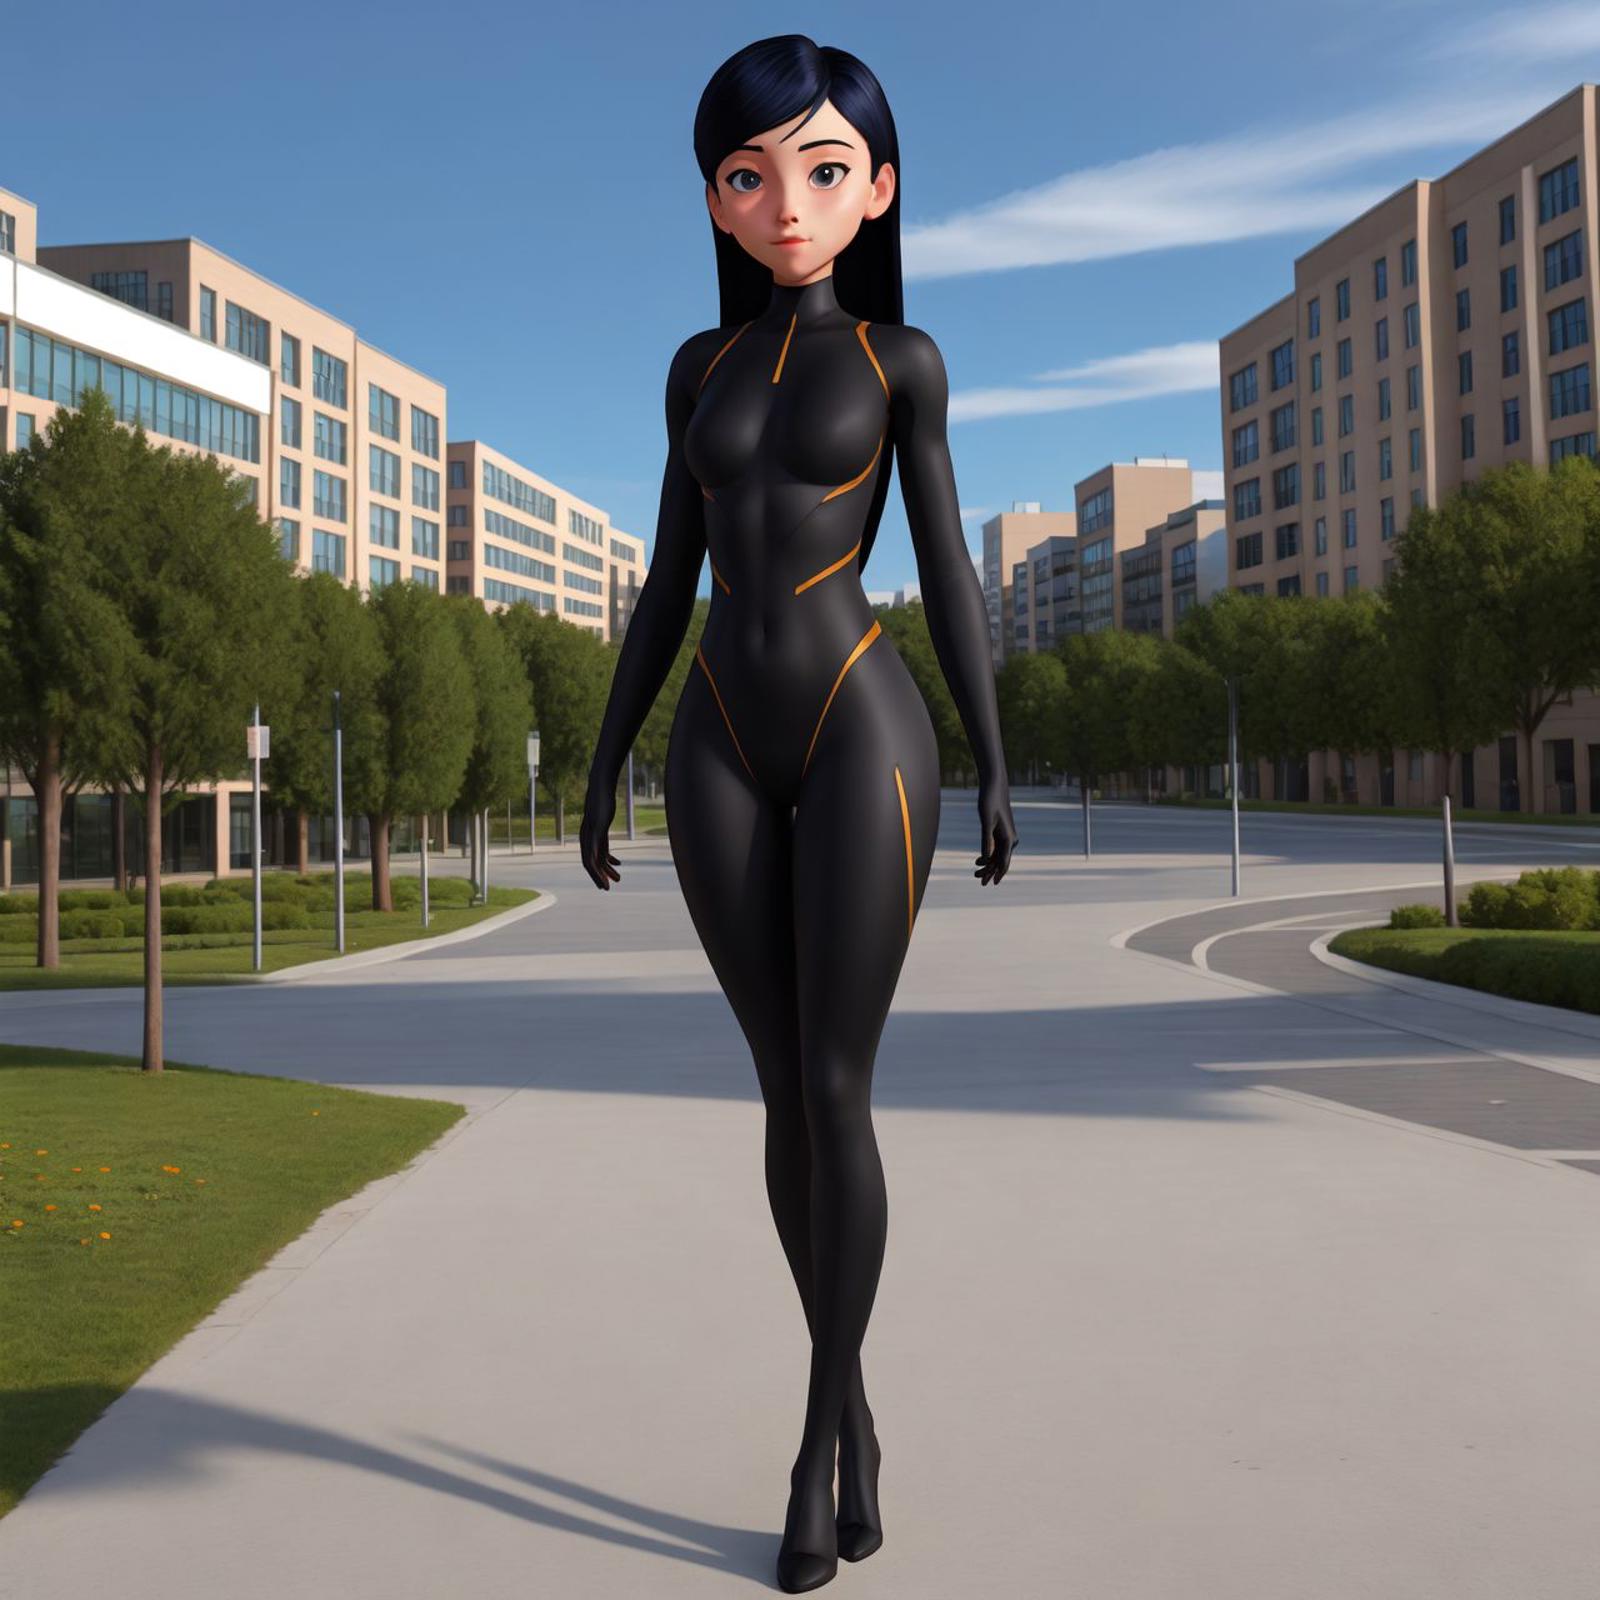 Violet Parr (The Incredibles) image by marusame